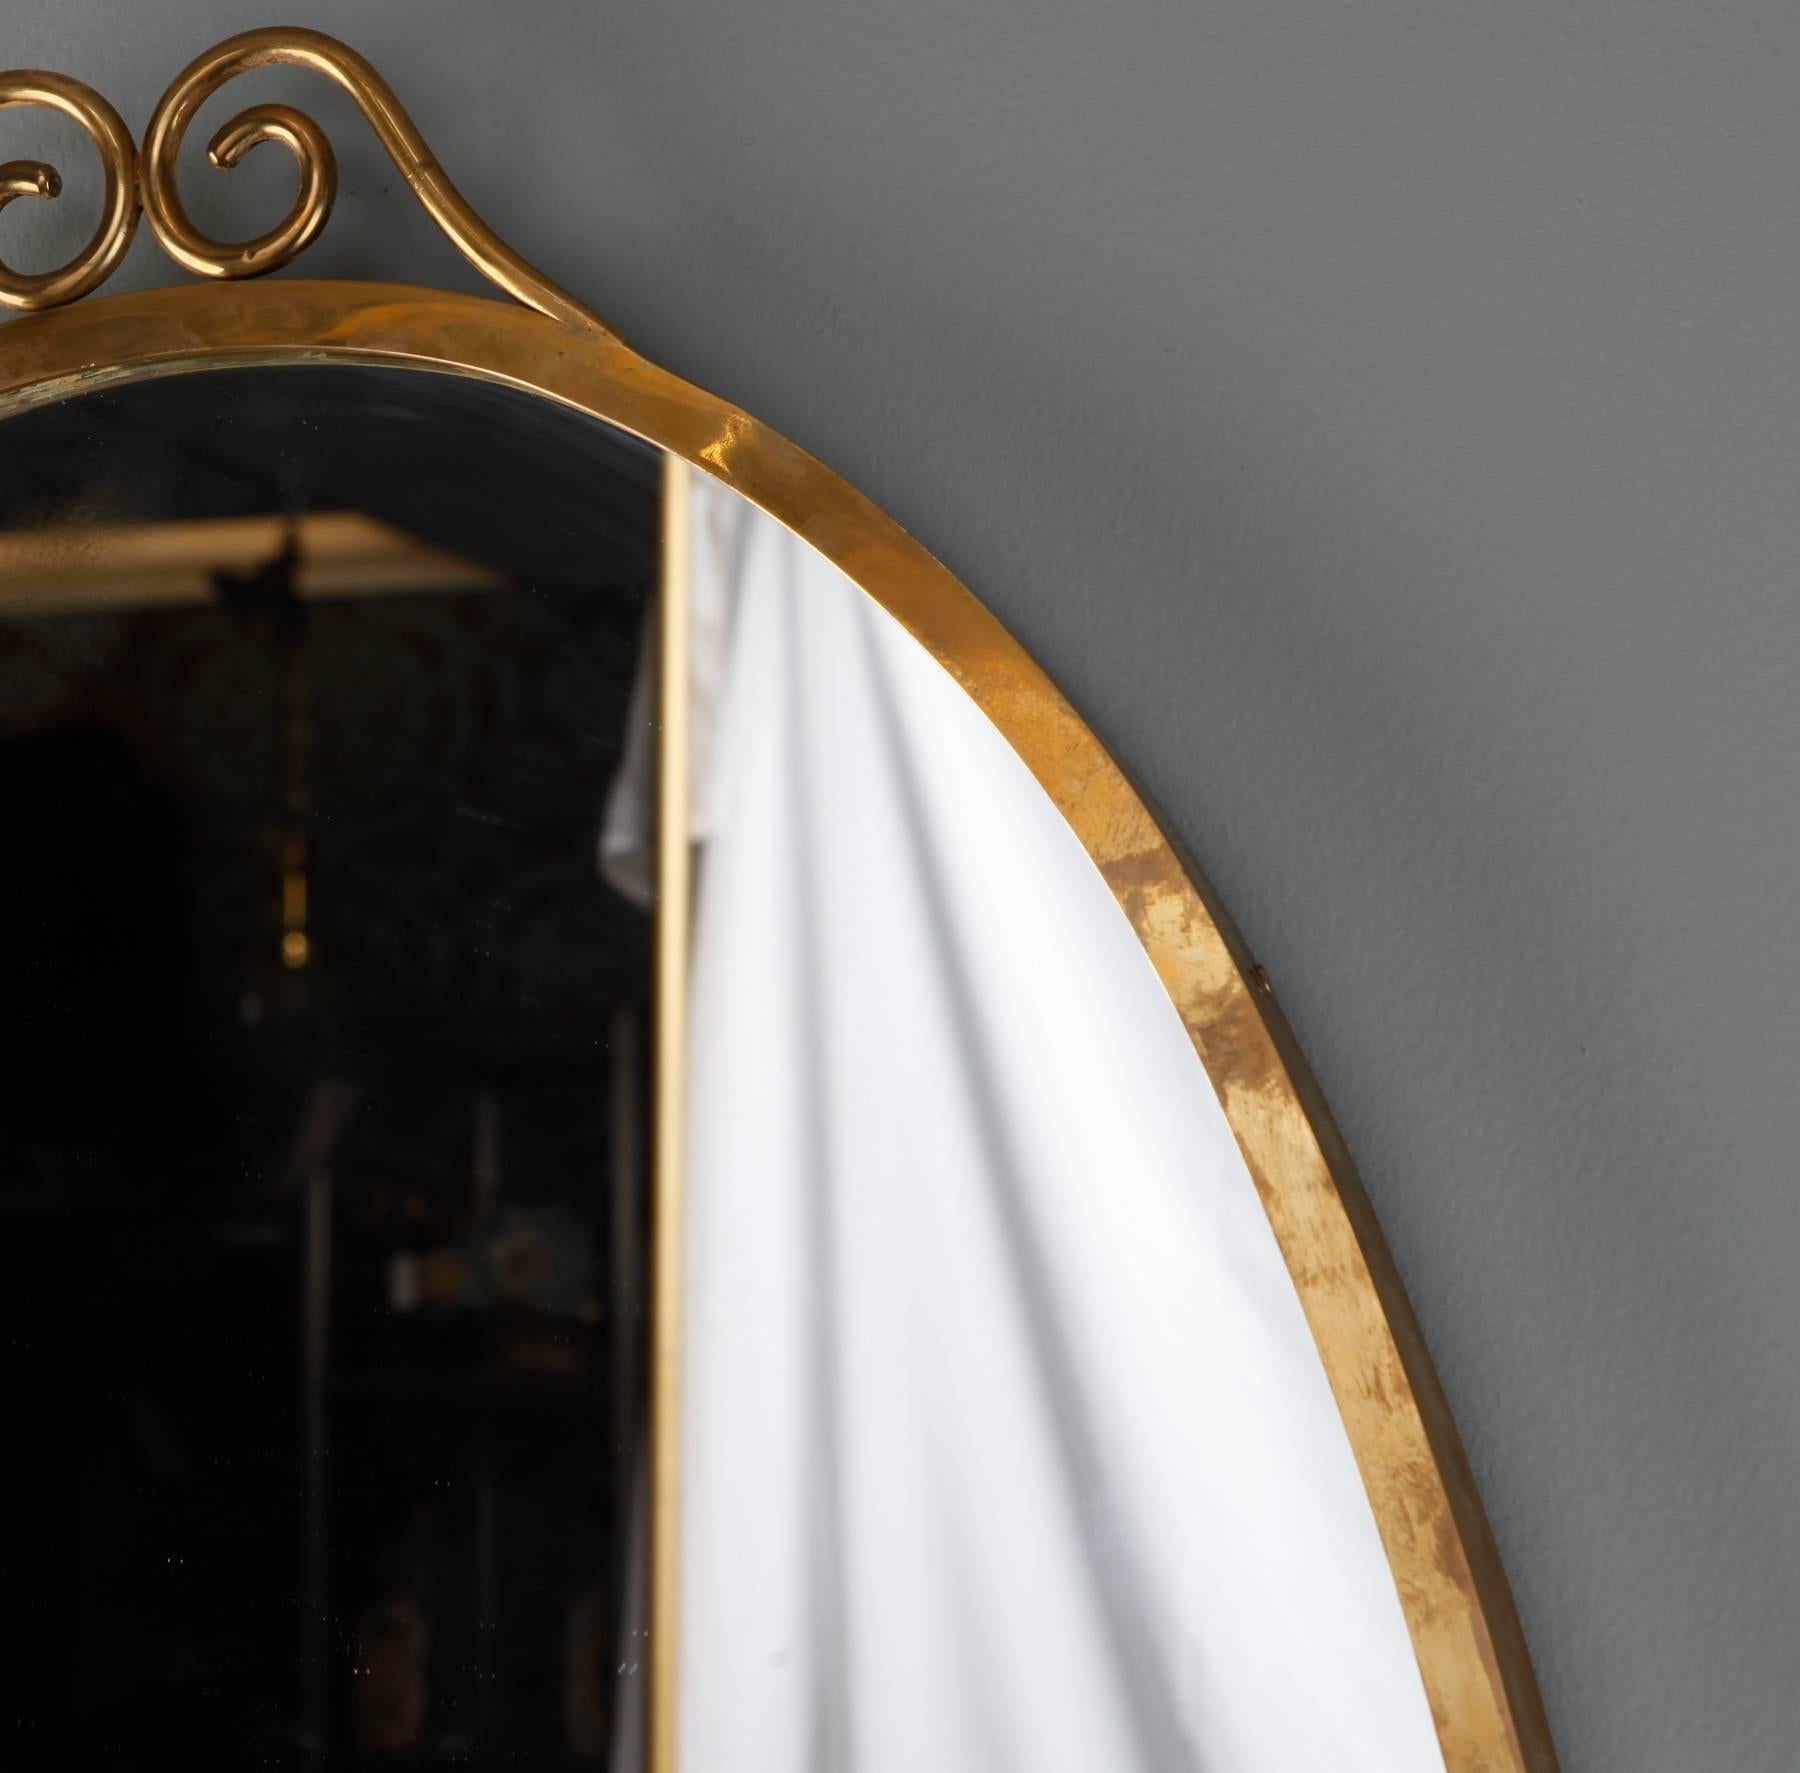 Tall oval mirror with brass frame and delicate scrolled crest. Found in France, believed to be Italian dating from late 1950s/early 1960s.
